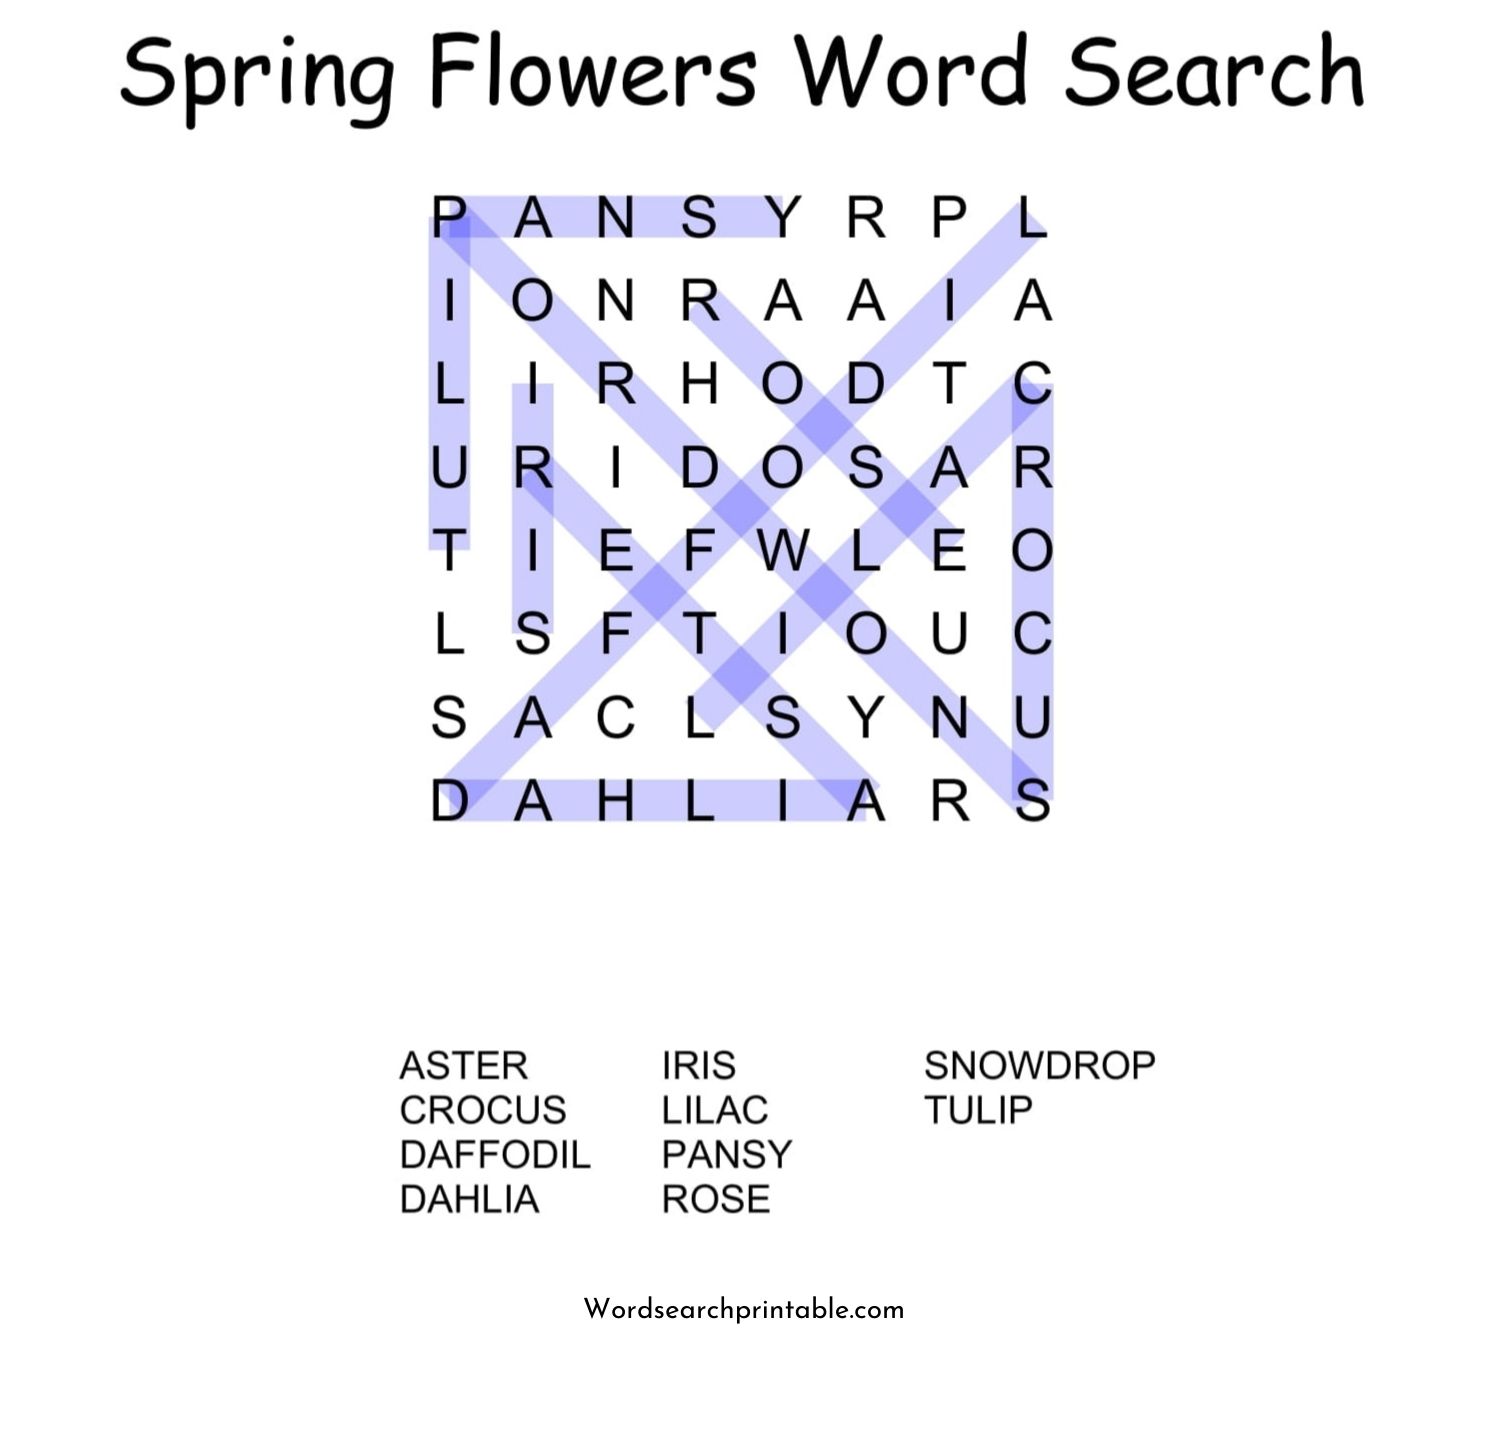 spring flowers word search puzzle solution